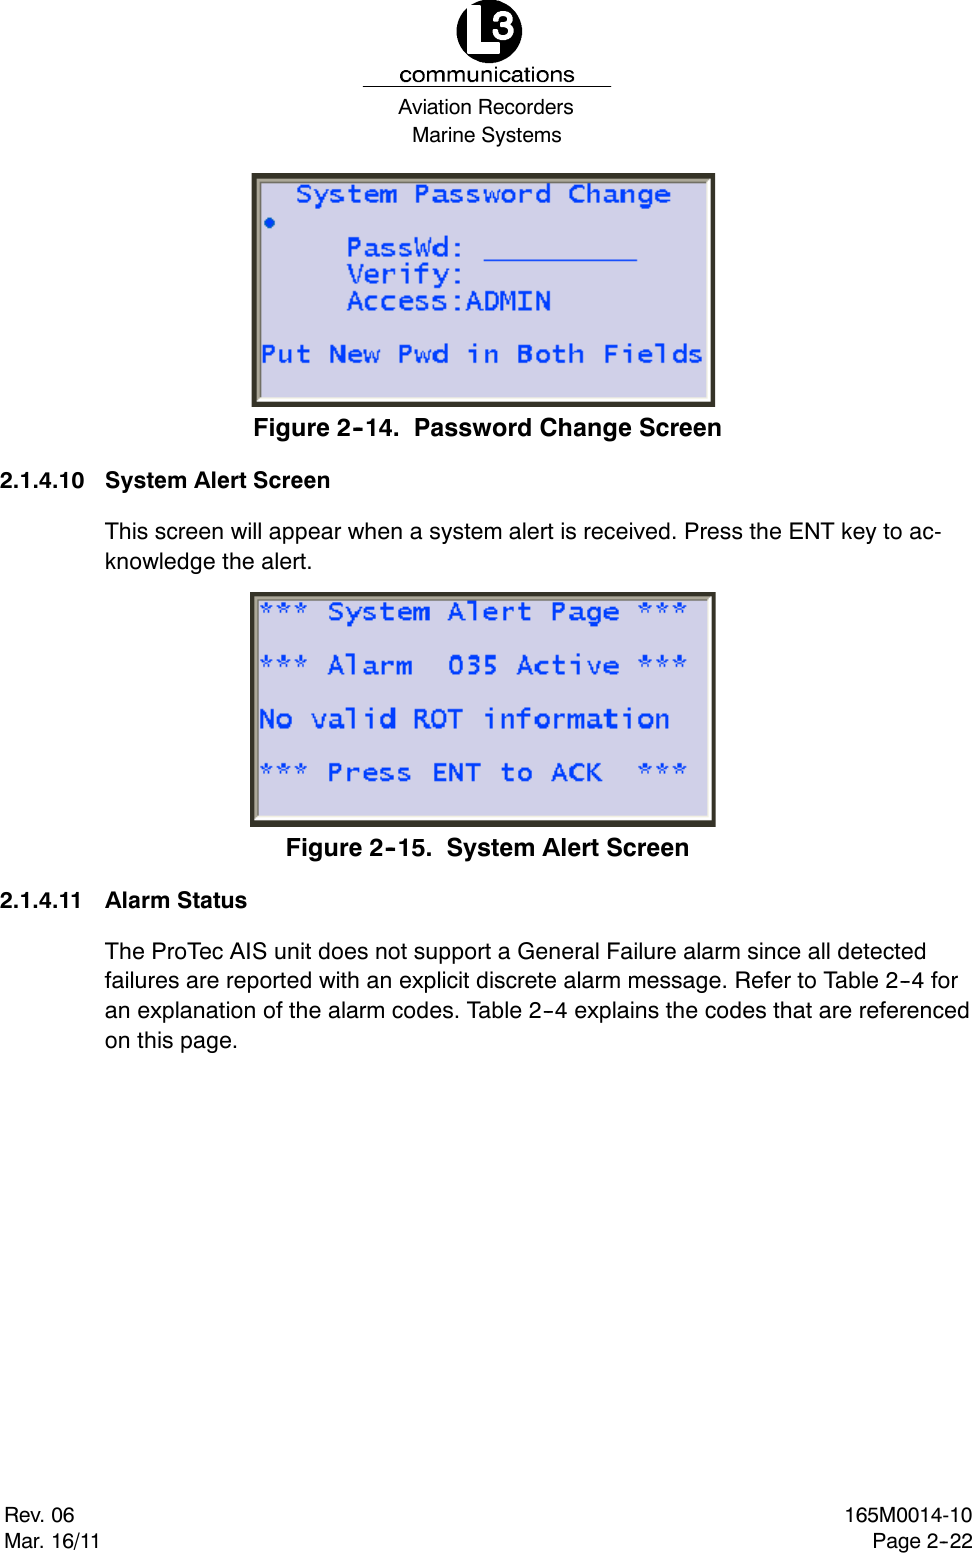 Marine SystemsAviation RecordersRev. 06Mar. 16/11165M0014-10Page 2--22Figure 2--14. Password Change Screen2.1.4.10 System Alert ScreenThis screen will appear when a system alert is received. Press the ENT key to ac-knowledge the alert.Figure 2--15. System Alert Screen2.1.4.11 Alarm StatusThe ProTec AIS unit does not support a General Failure alarm since all detectedfailures are reported with an explicit discrete alarm message. Refer to Table 2--4 foran explanation of the alarm codes. Table 2--4 explains the codes that are referencedon this page.